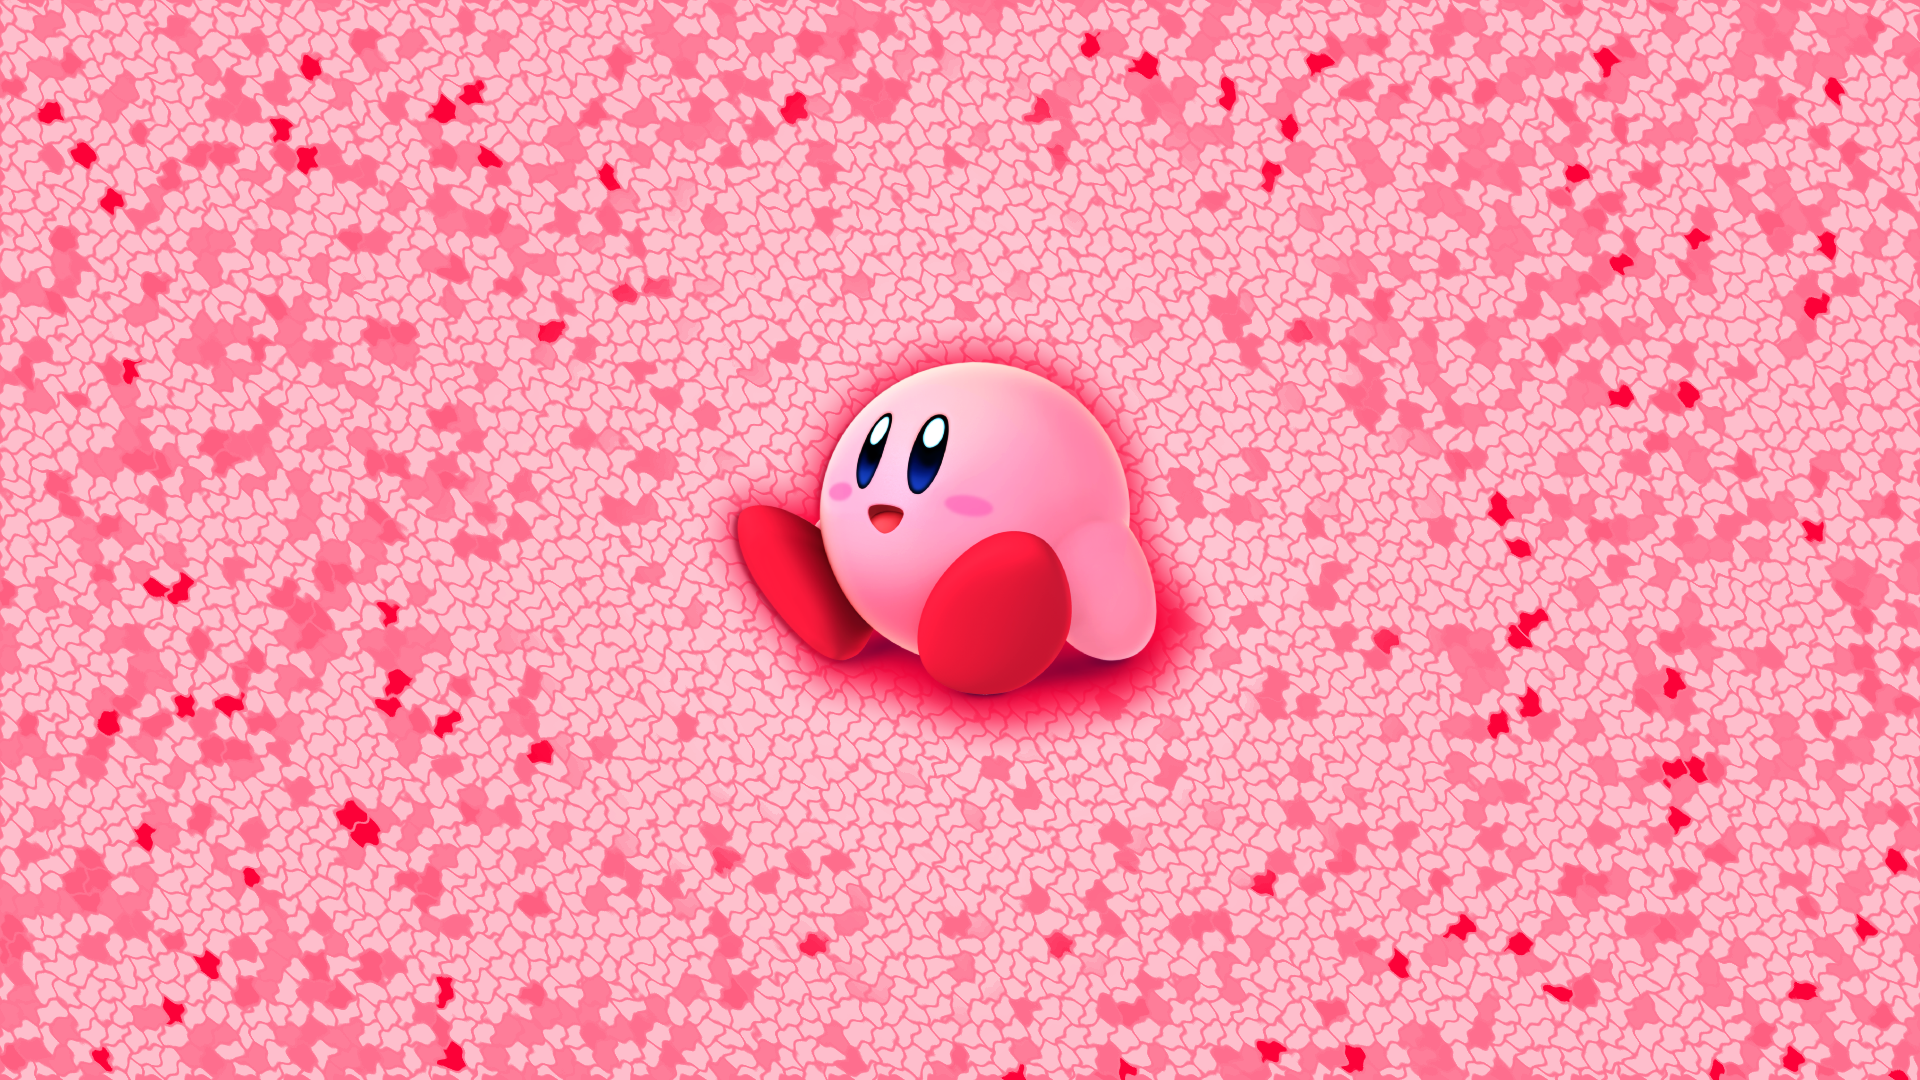 Free download Kirby Wallpaper Kirby wallpape [1920x1080] for your Desktop, Mobile & Tablet. Explore Pink Kirby Wallpaper. Pink Kirby Wallpaper, Kirby Wallpaper, Kirby Background